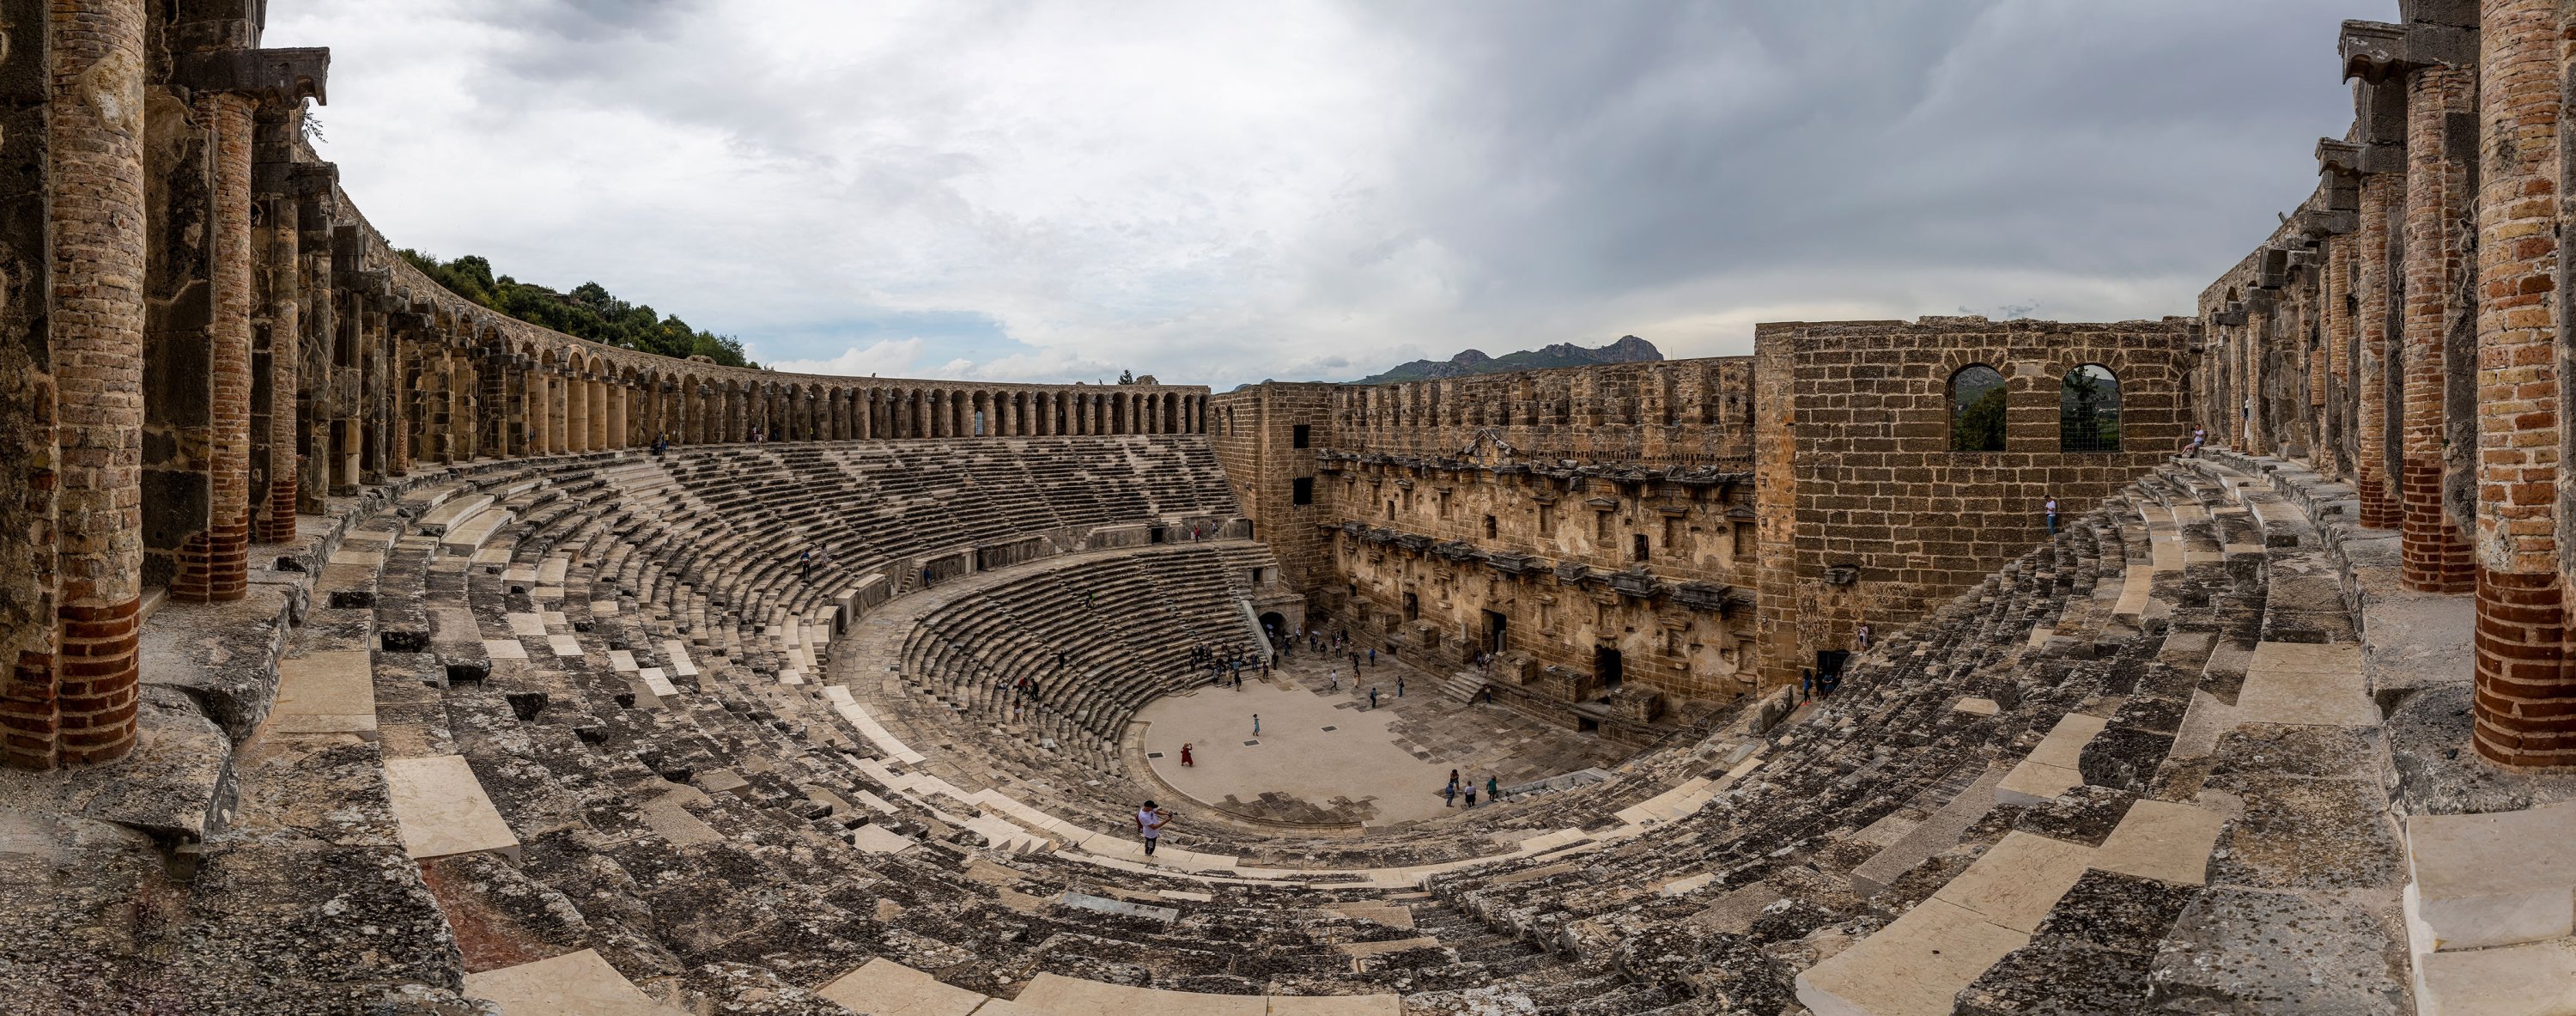 Built in 155 by Greek Architect Zenon, Aspendos is known for being the best-preserved theater of antiquity that provided seating for 7,000. (Shutterstock Photo)